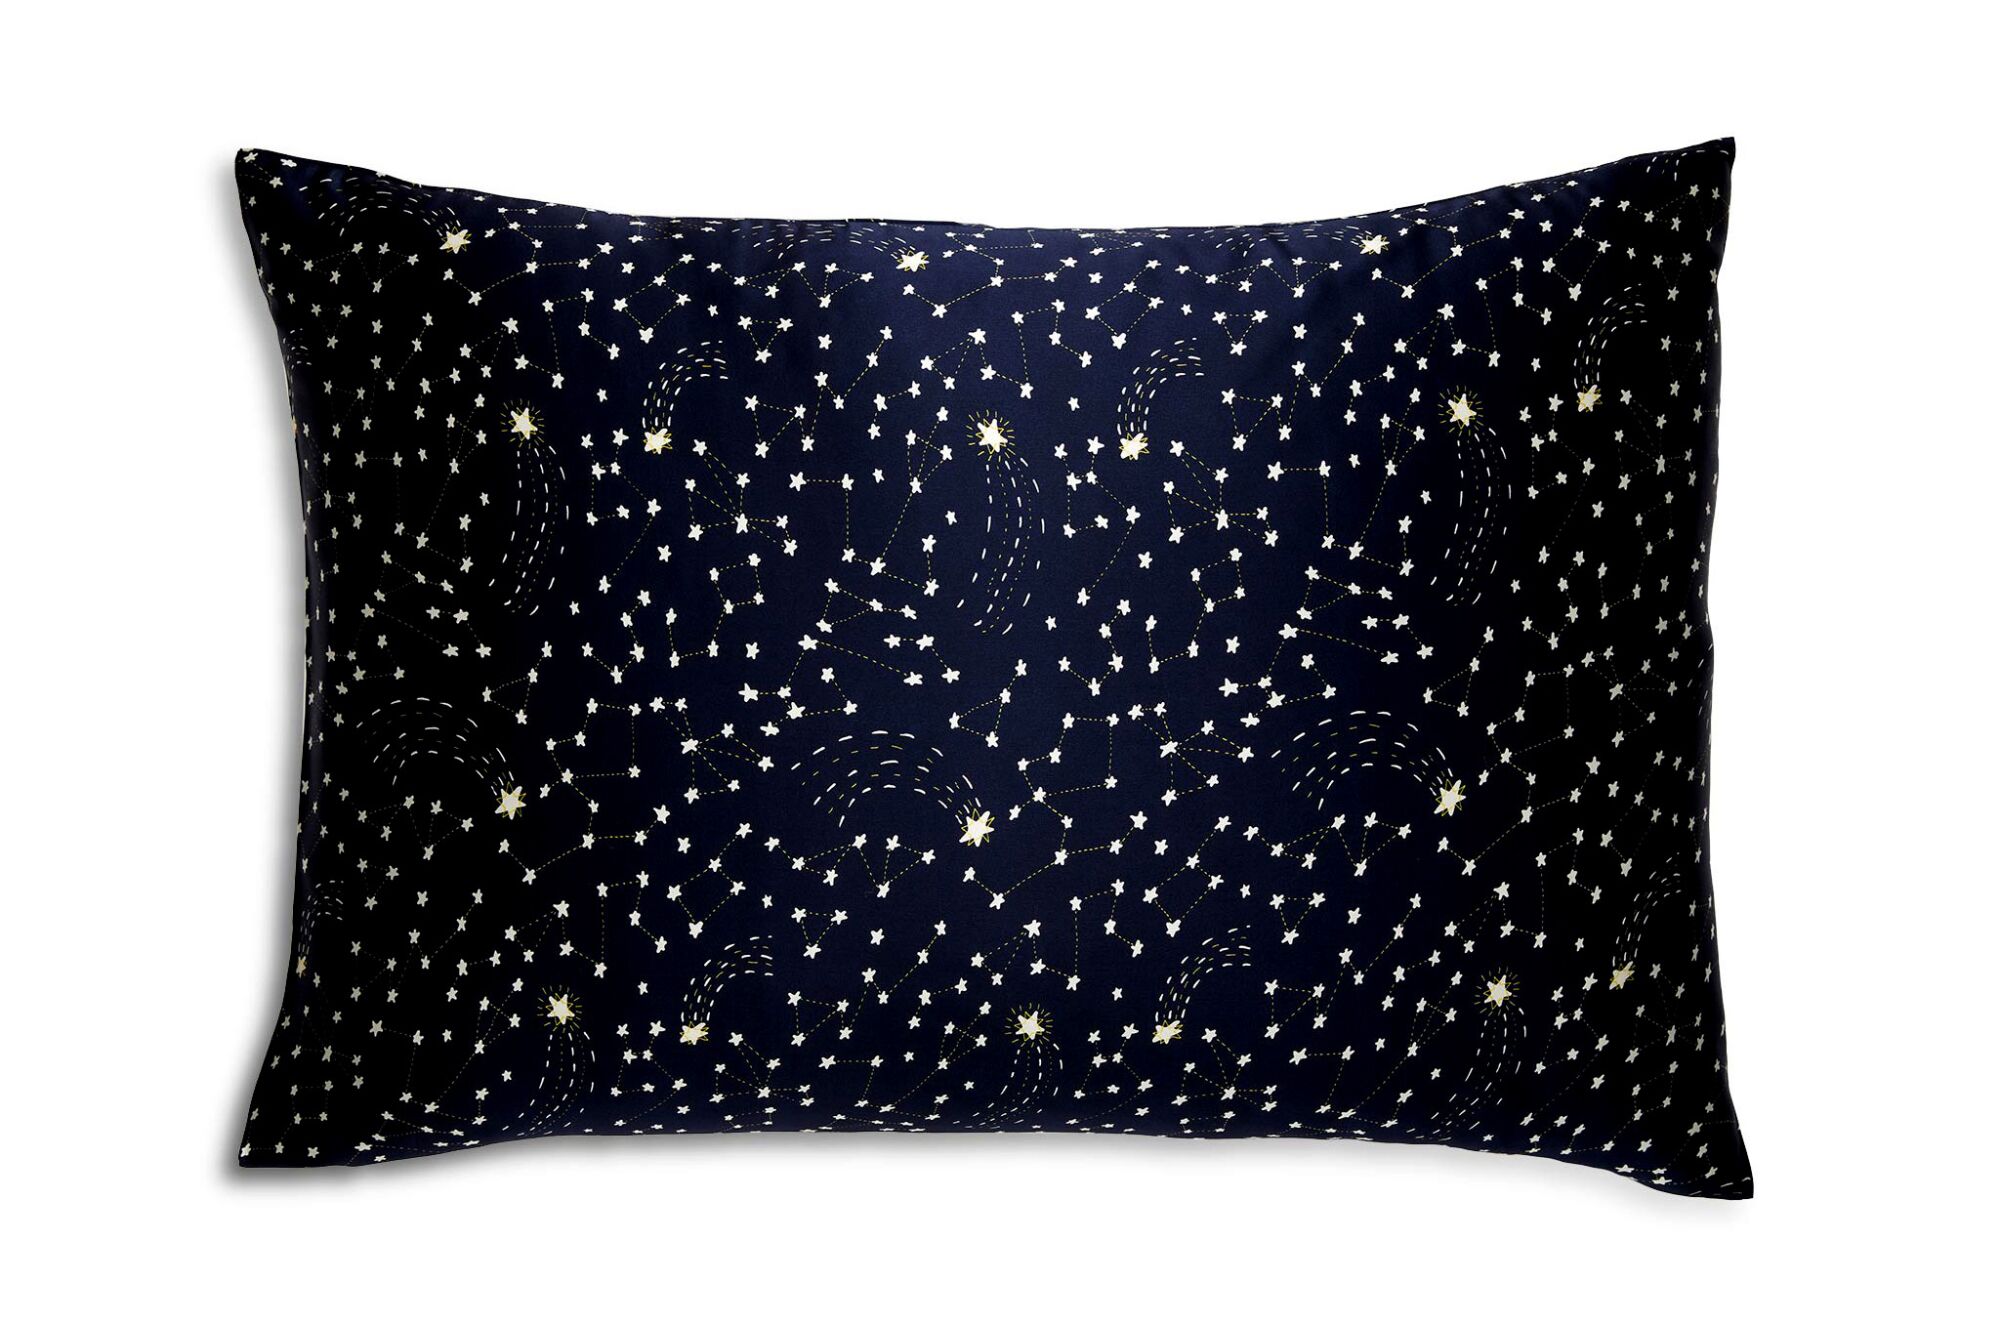 A black pillowcase with a textured white dotted design